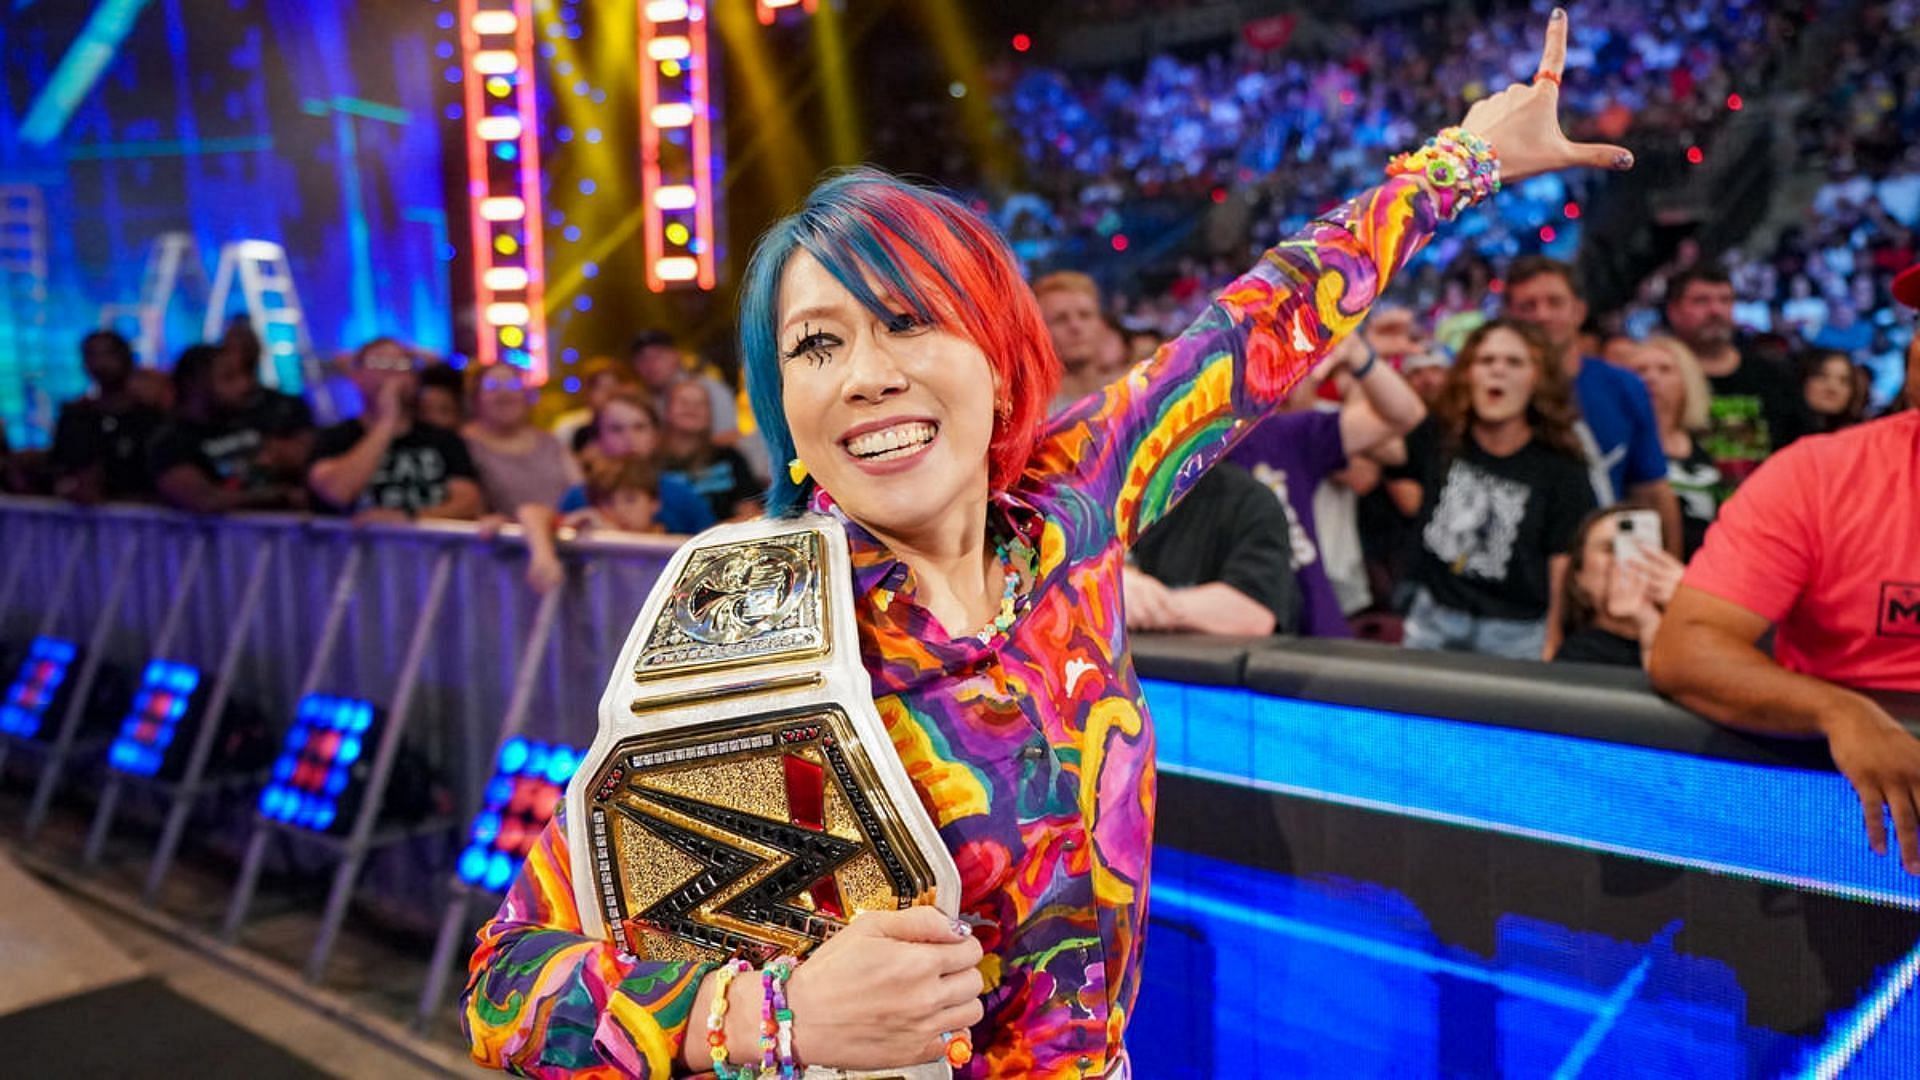 Asuka is the current WWE Womens Champion